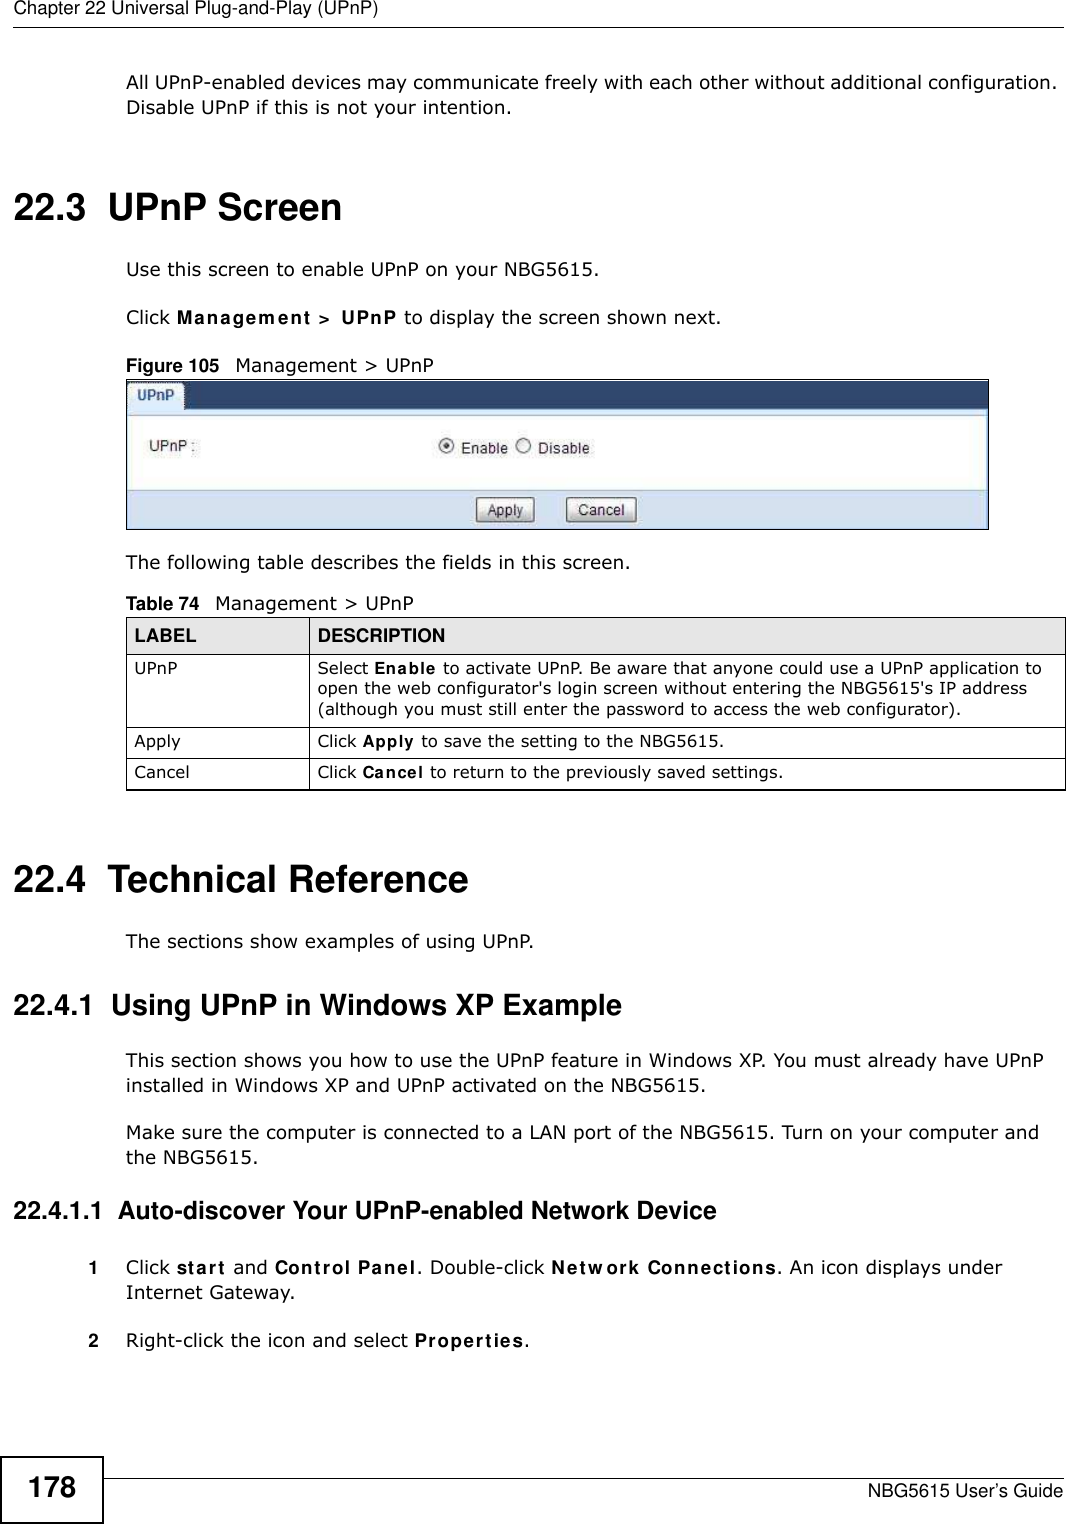 Chapter 22 Universal Plug-and-Play (UPnP)NBG5615 User’s Guide178All UPnP-enabled devices may communicate freely with each other without additional configuration. Disable UPnP if this is not your intention. 22.3  UPnP Screen Use this screen to enable UPnP on your NBG5615.Click Managem ent &gt;  UPnP to display the screen shown next. Figure 105   Management &gt; UPnPThe following table describes the fields in this screen.22.4  Technical ReferenceThe sections show examples of using UPnP. 22.4.1  Using UPnP in Windows XP ExampleThis section shows you how to use the UPnP feature in Windows XP. You must already have UPnP installed in Windows XP and UPnP activated on the NBG5615.Make sure the computer is connected to a LAN port of the NBG5615. Turn on your computer and the NBG5615. 22.4.1.1  Auto-discover Your UPnP-enabled Network Device1Click start and Control Panel. Double-click Netw ork Connections. An icon displays under Internet Gateway.2Right-click the icon and select Properties. Table 74   Management &gt; UPnPLABEL DESCRIPTIONUPnP Select Enable to activate UPnP. Be aware that anyone could use a UPnP application to open the web configurator&apos;s login screen without entering the NBG5615&apos;s IP address (although you must still enter the password to access the web configurator).Apply Click Apply to save the setting to the NBG5615.Cancel Click Cancel to return to the previously saved settings.